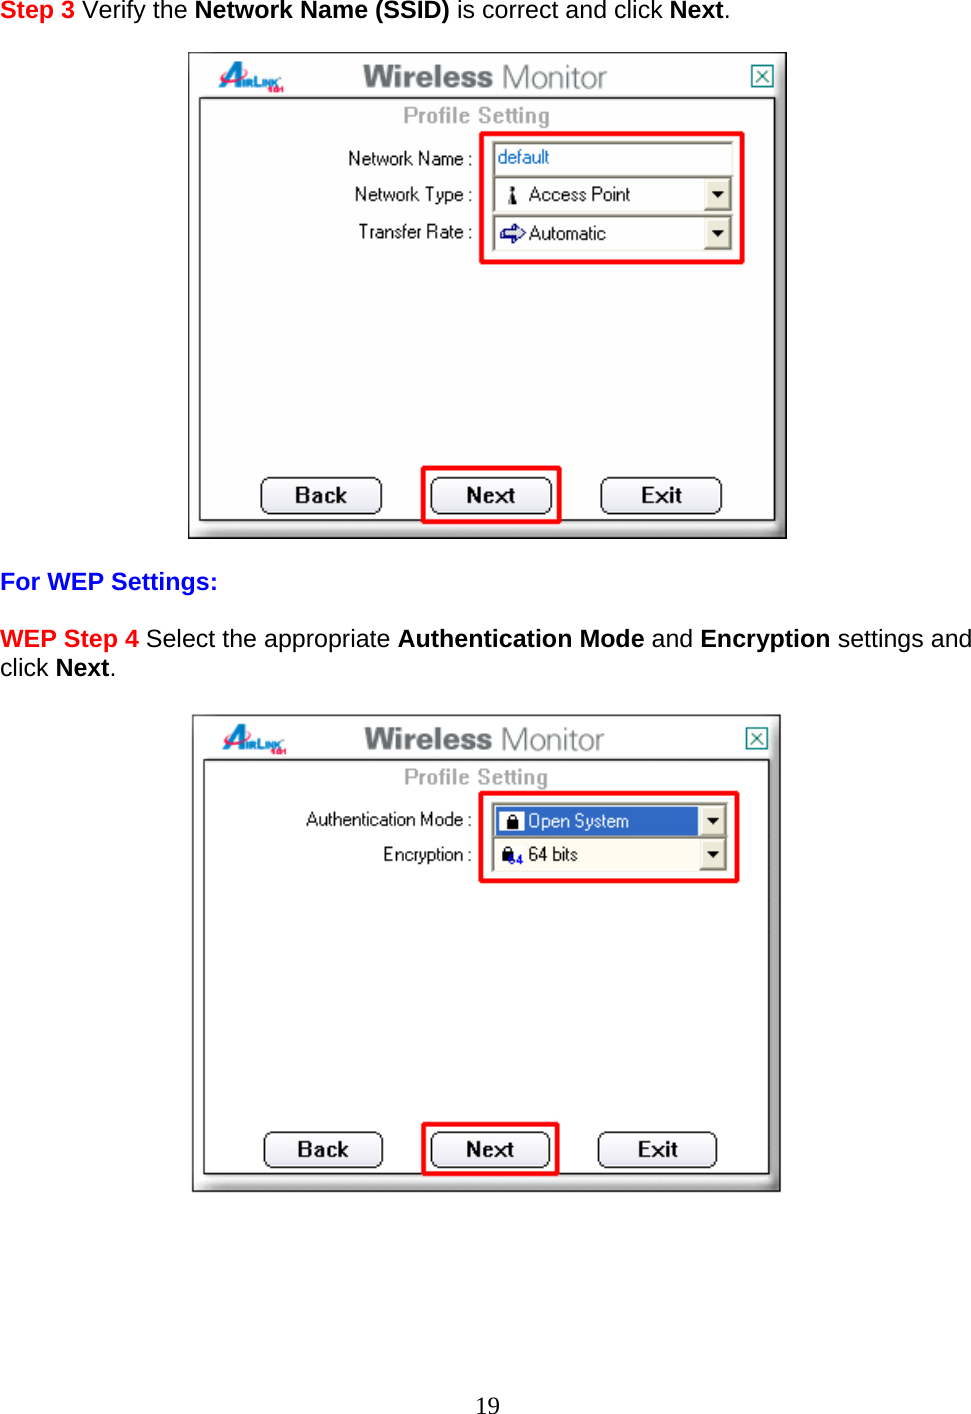 19 Step 3 Verify the Network Name (SSID) is correct and click Next.    For WEP Settings:  WEP Step 4 Select the appropriate Authentication Mode and Encryption settings and click Next.        